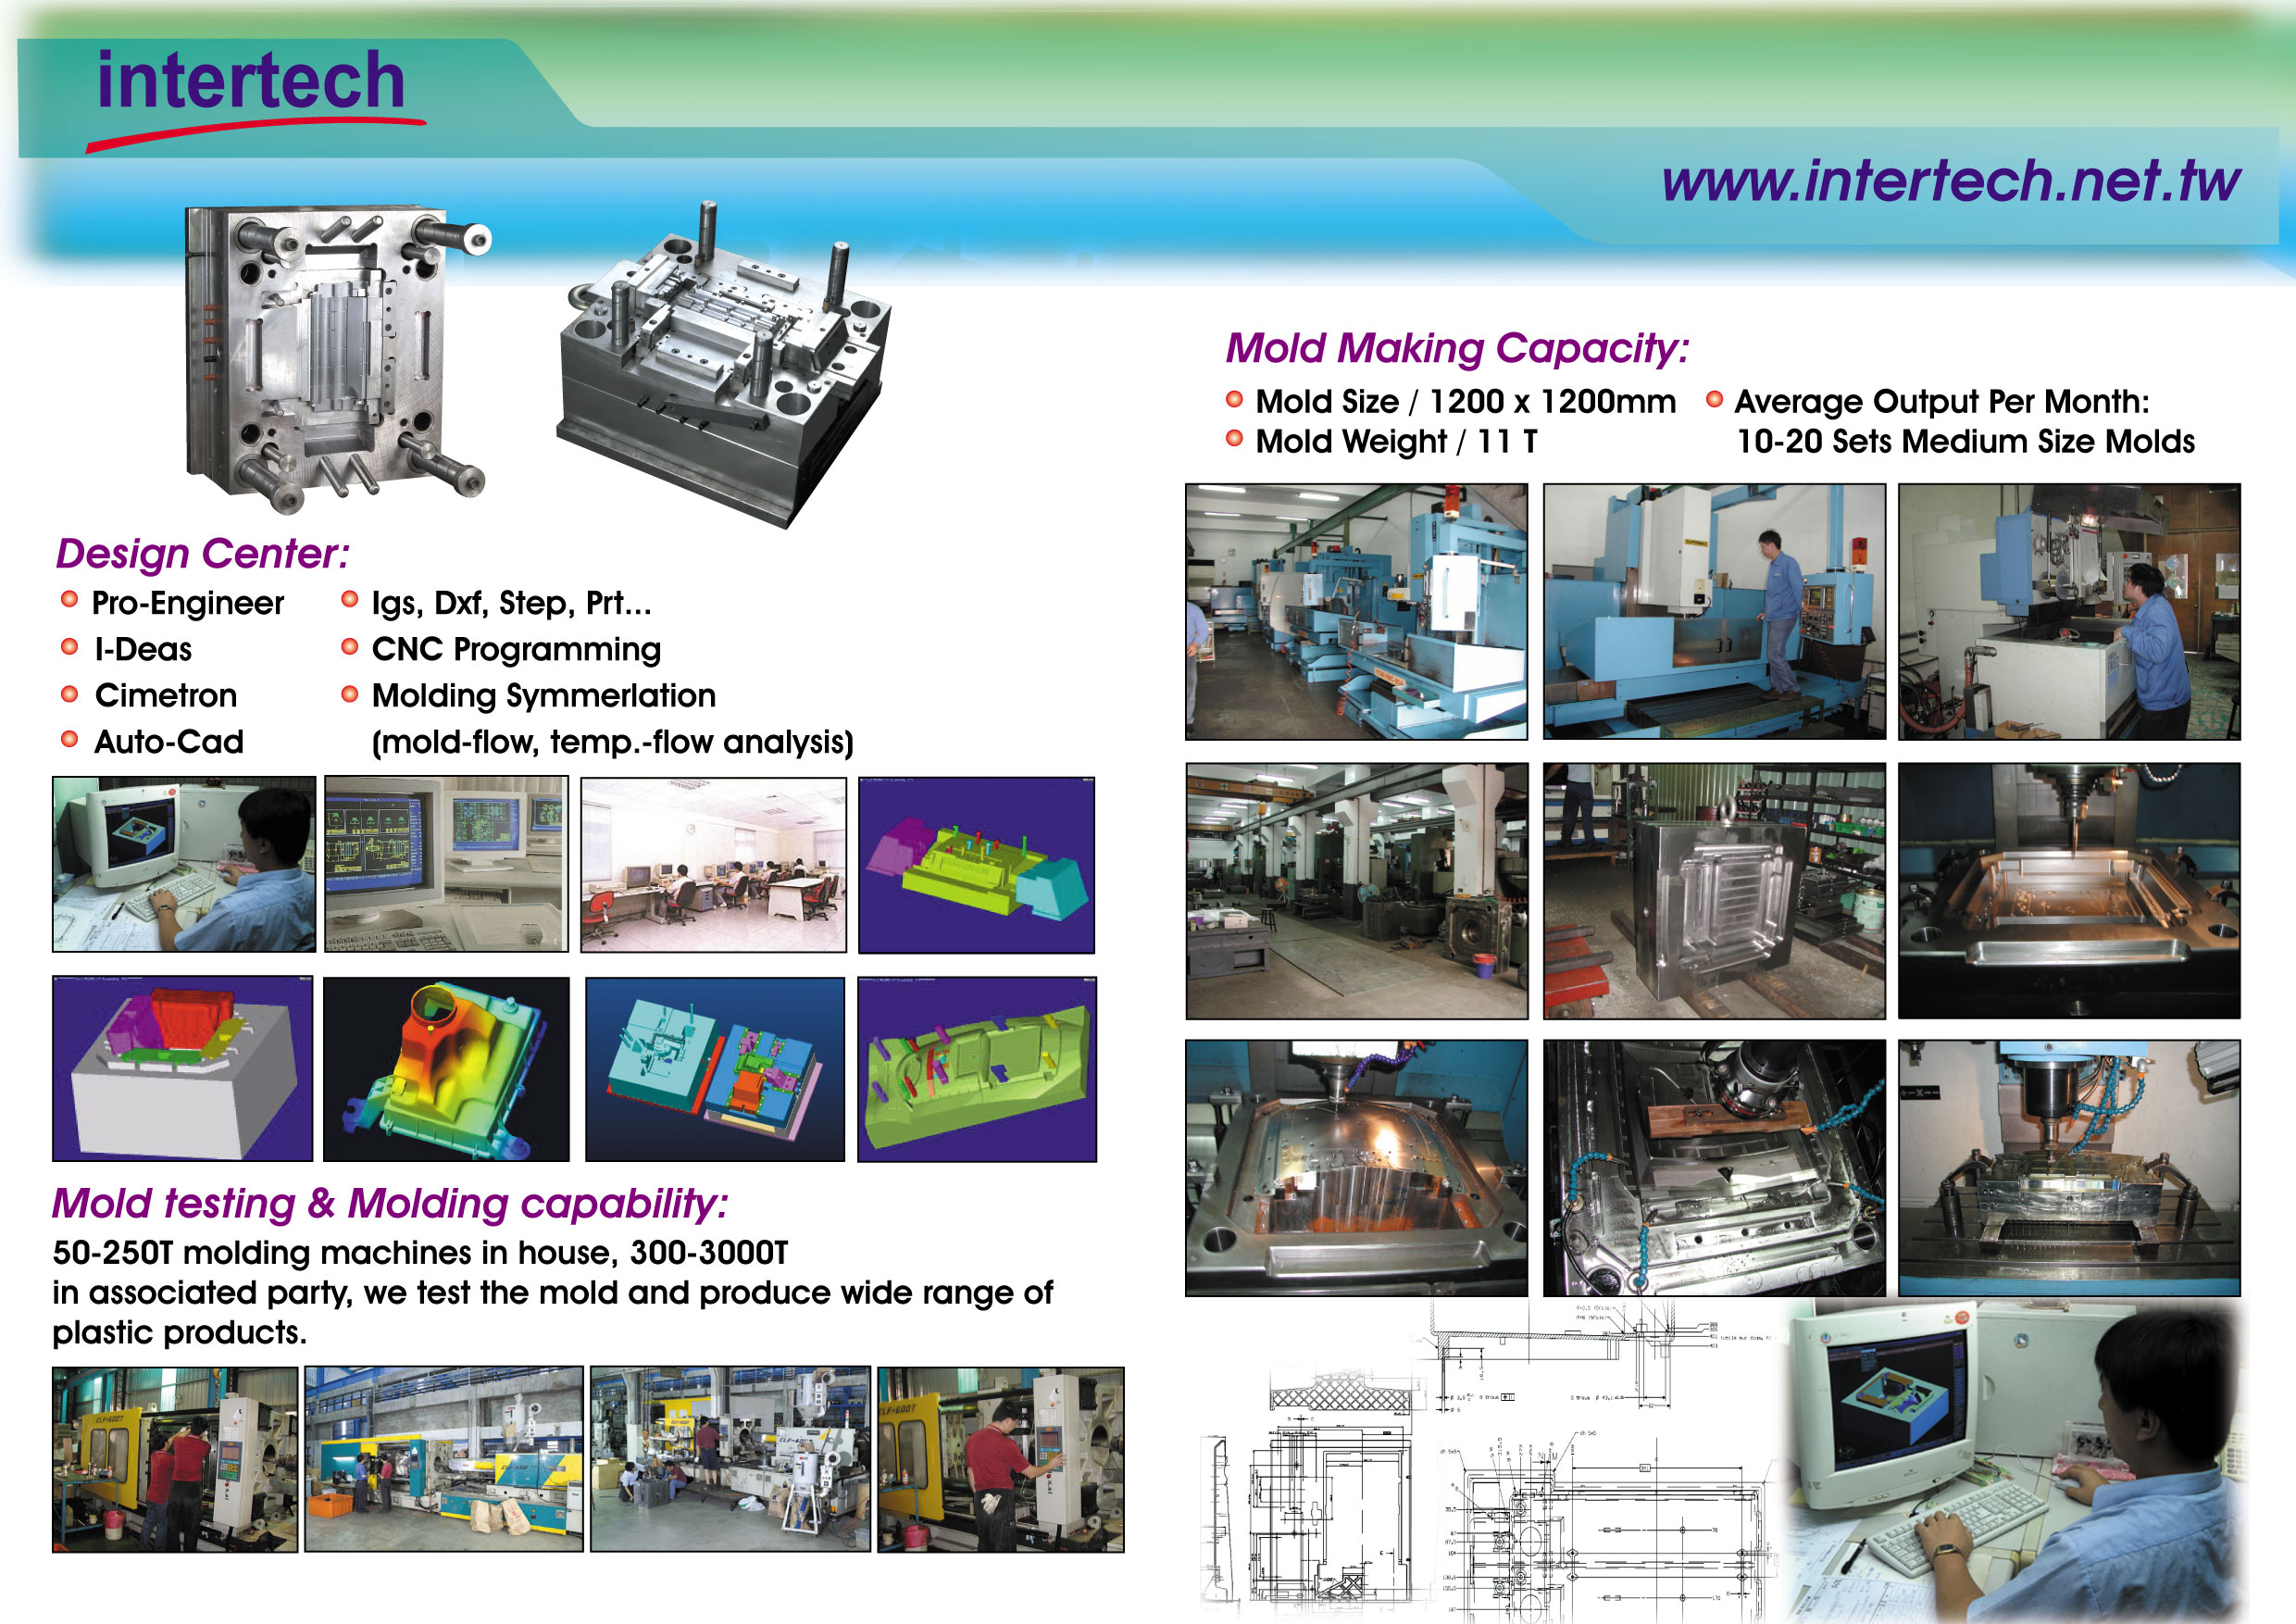 Details about molding services of INTERTECH